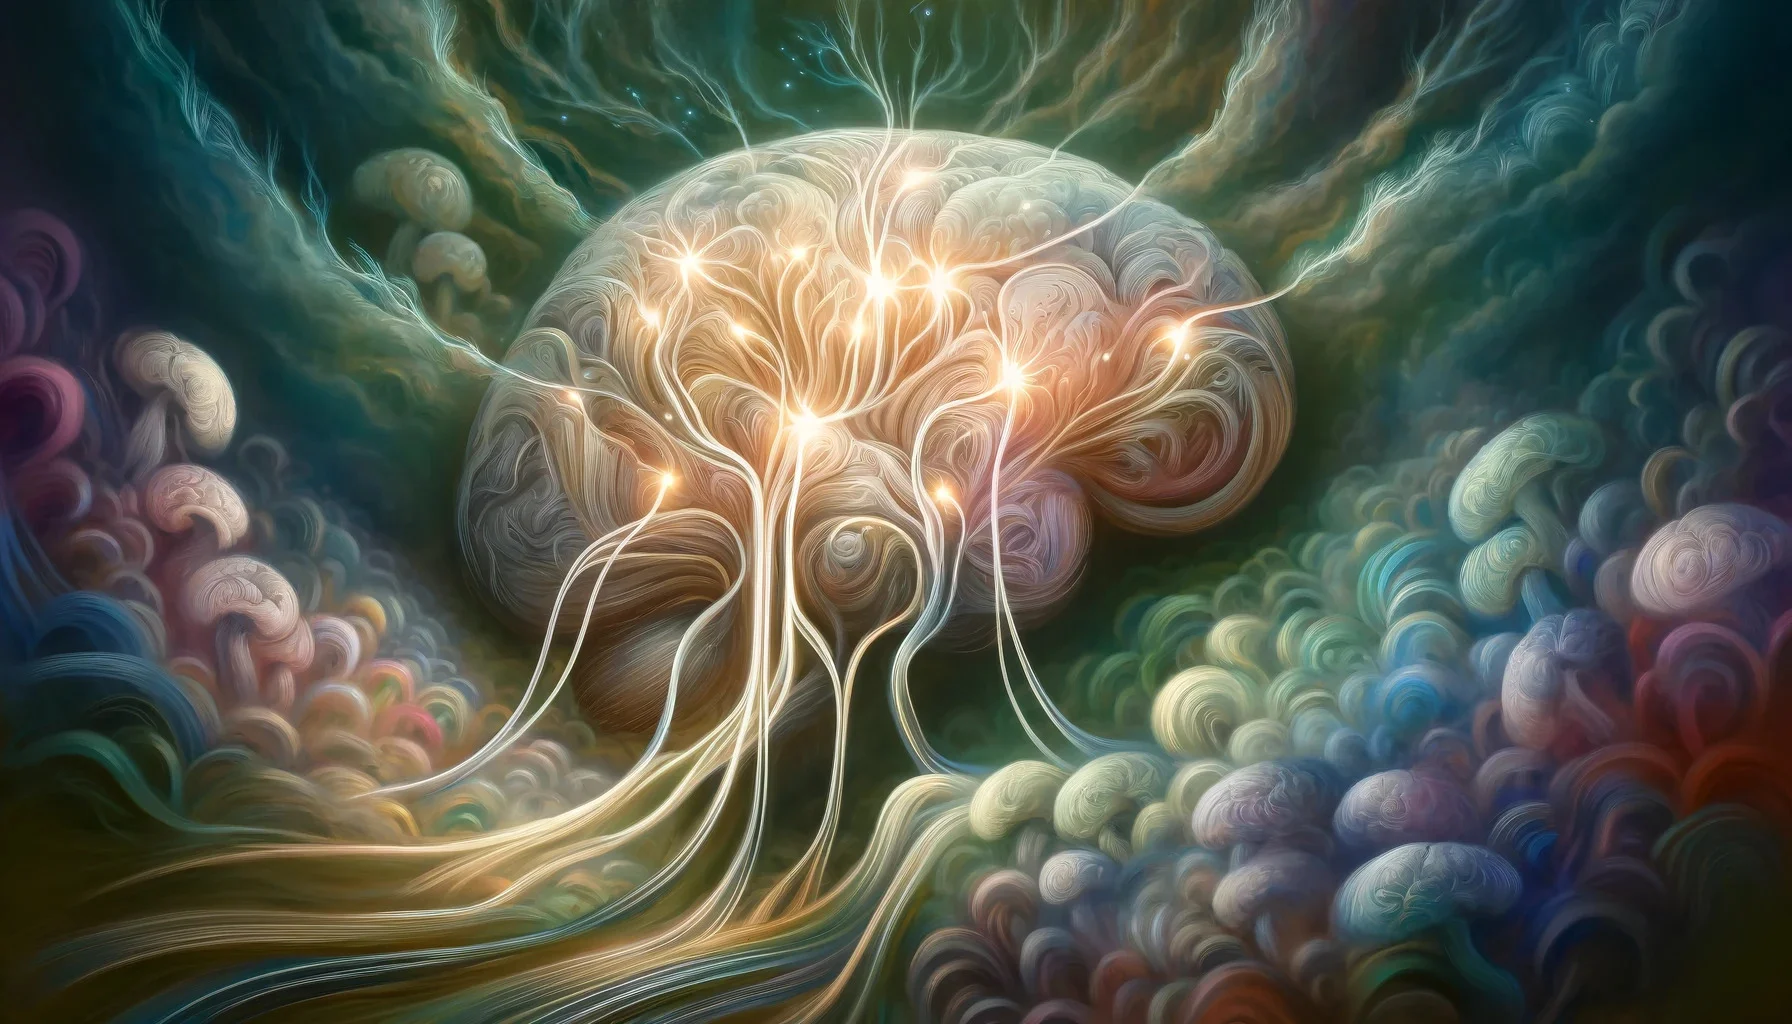 An artistic interpretation of neural connections in the brain being enhanced by the nootropic compound of oyster mushrooms.